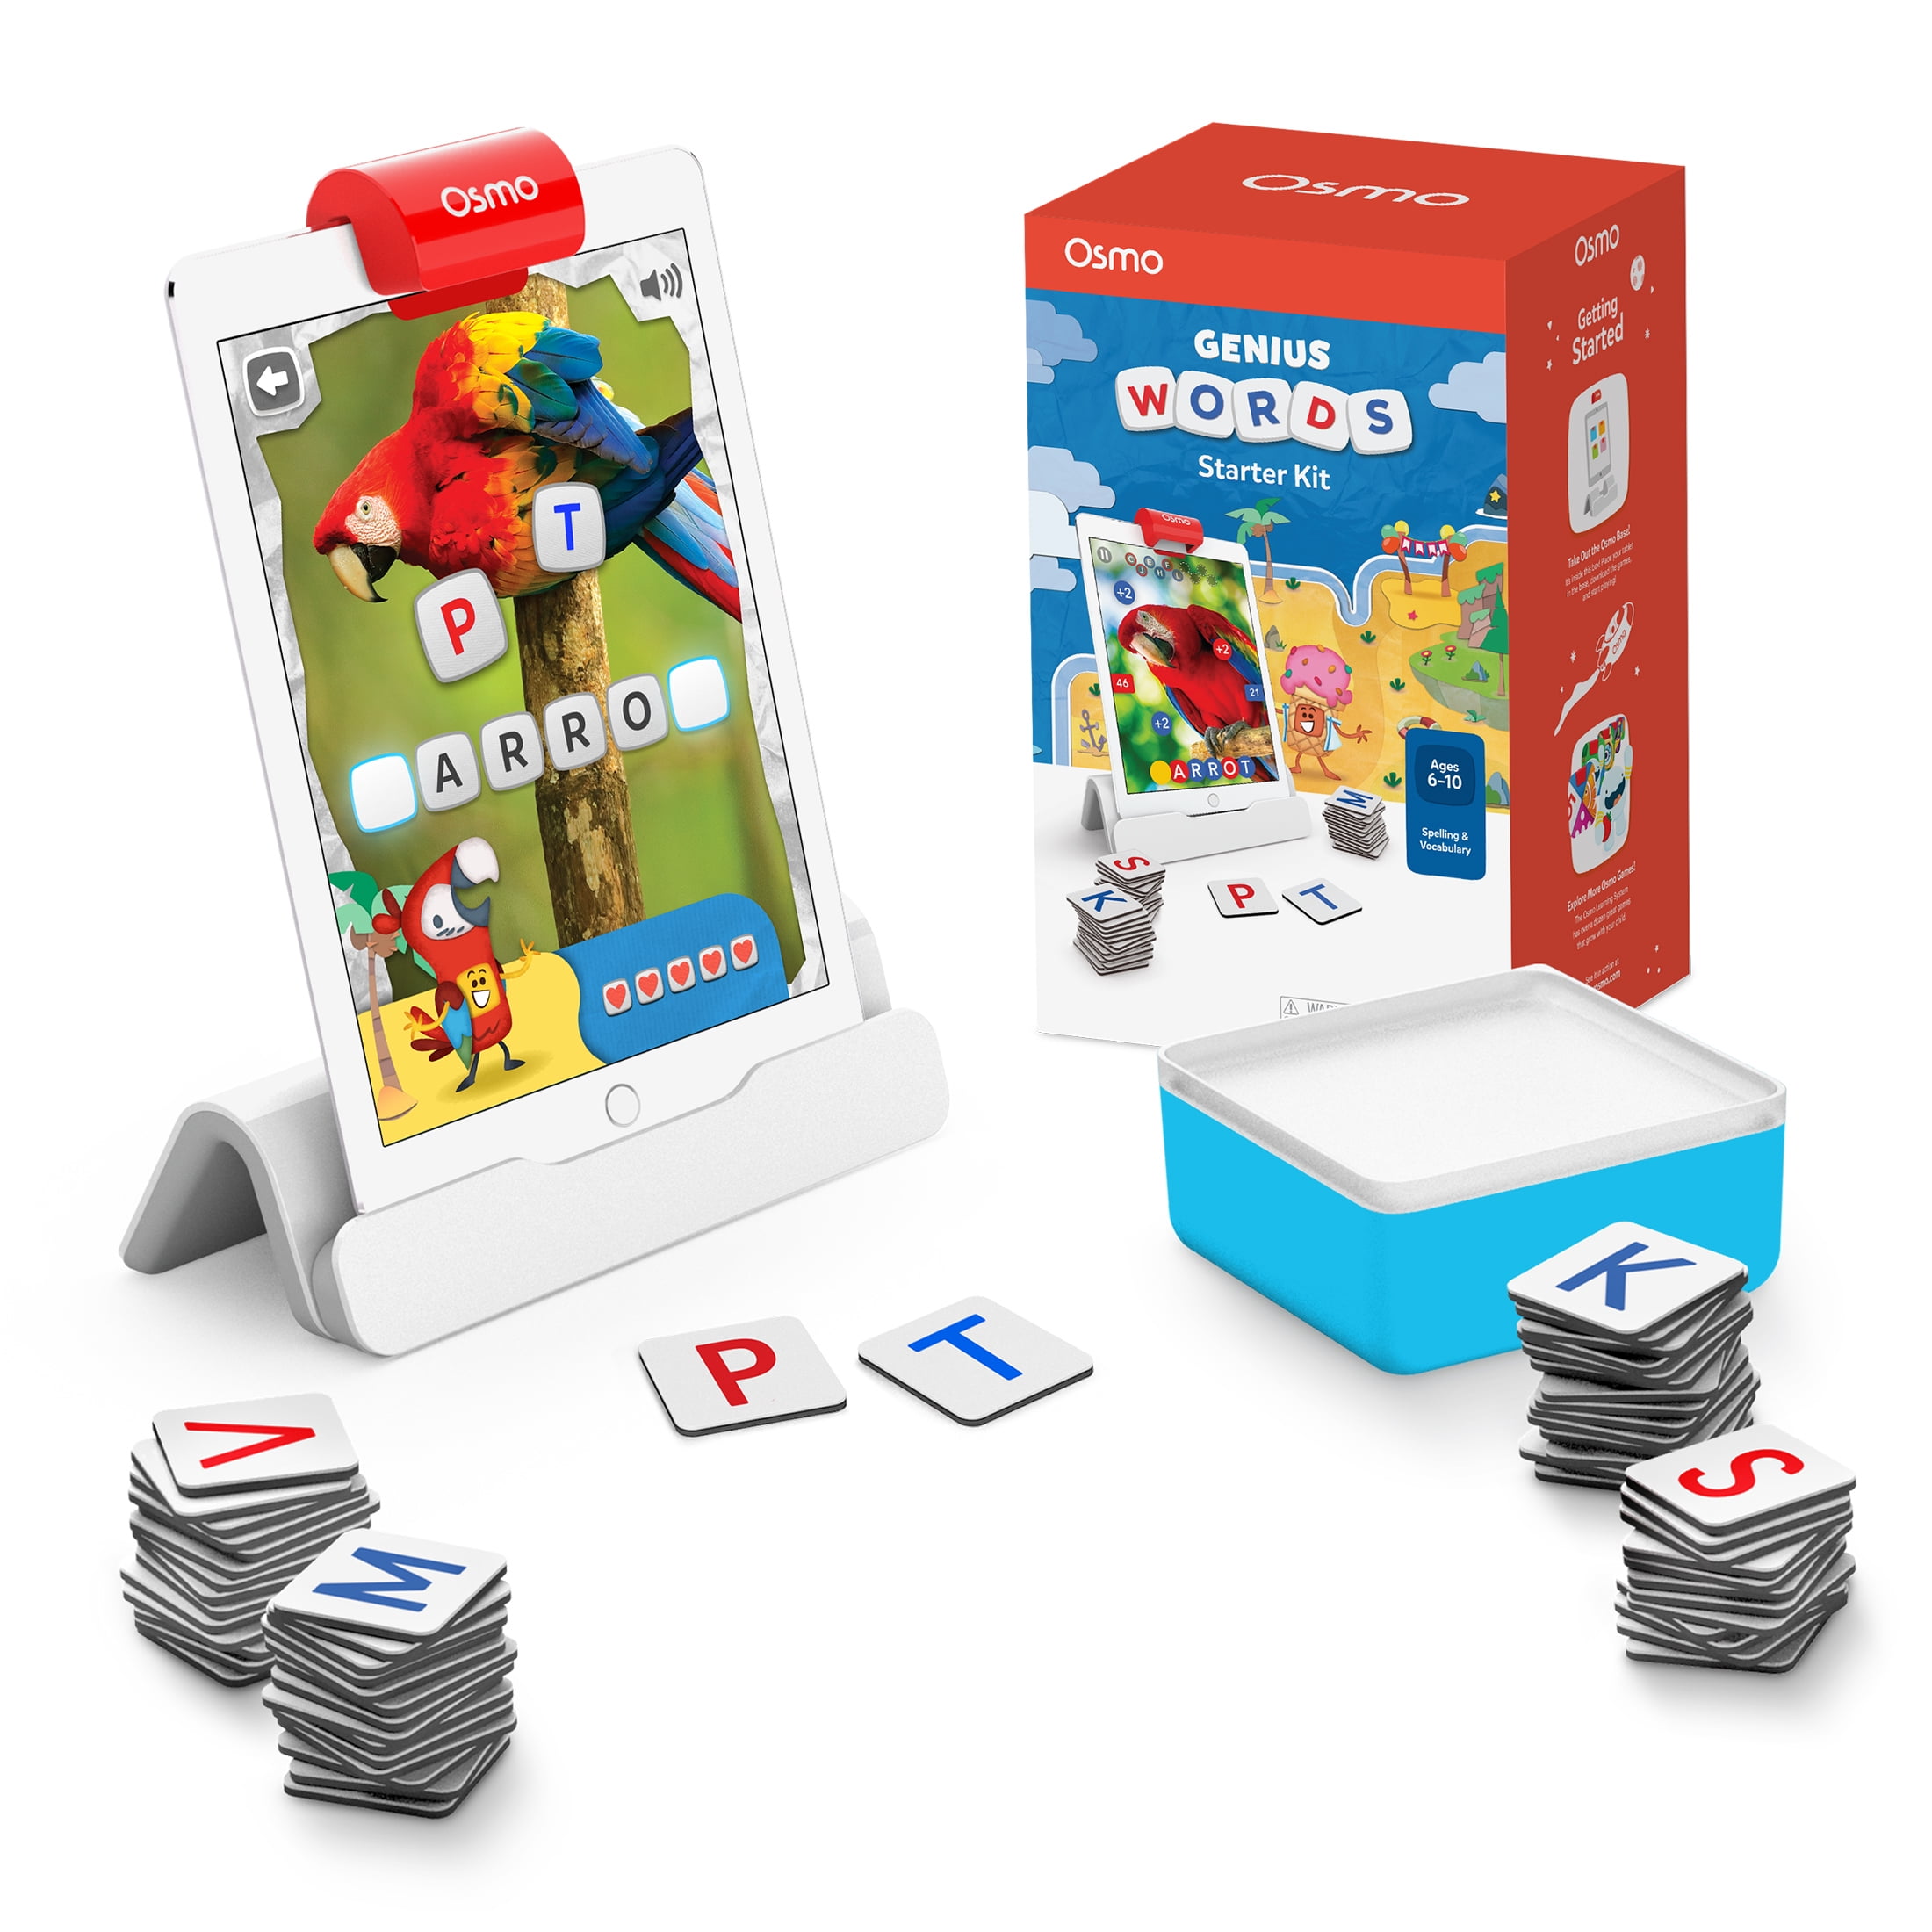 Genius Kit for Fire Tablet 5 Hands-On Learning Games Osmo Prob Ages 6-10 